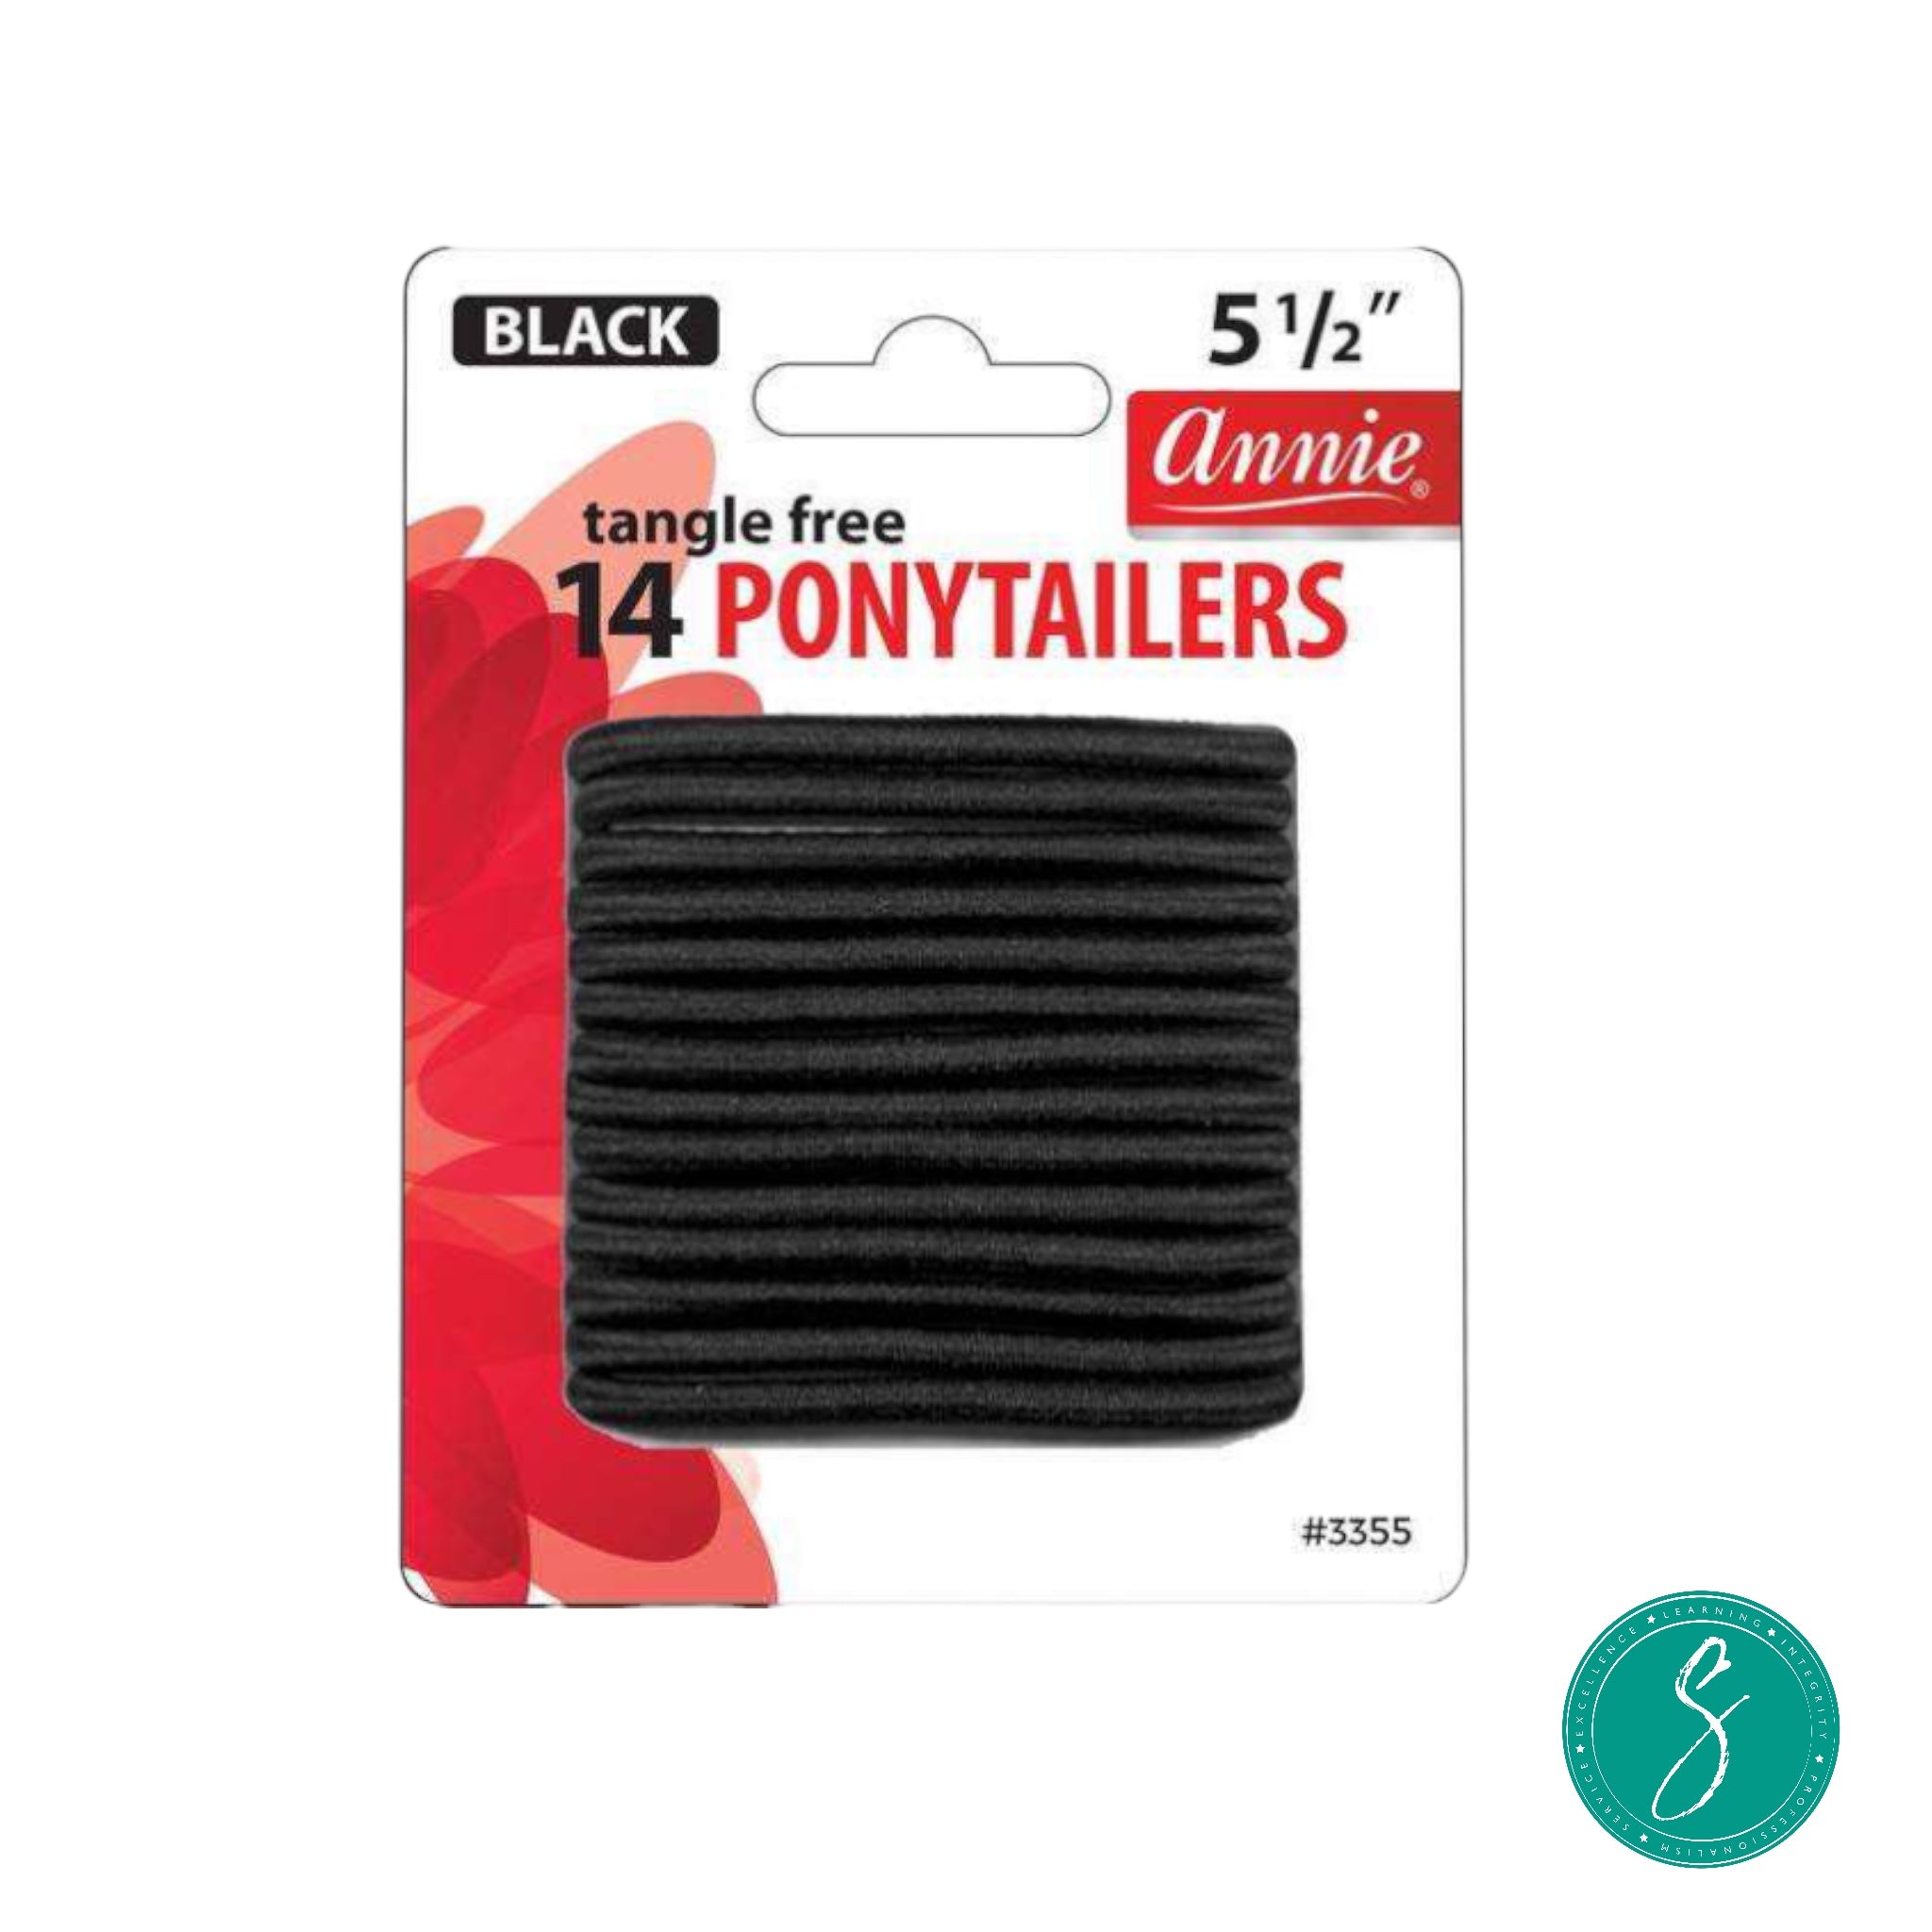 Annie Tangle Free Ponytailers